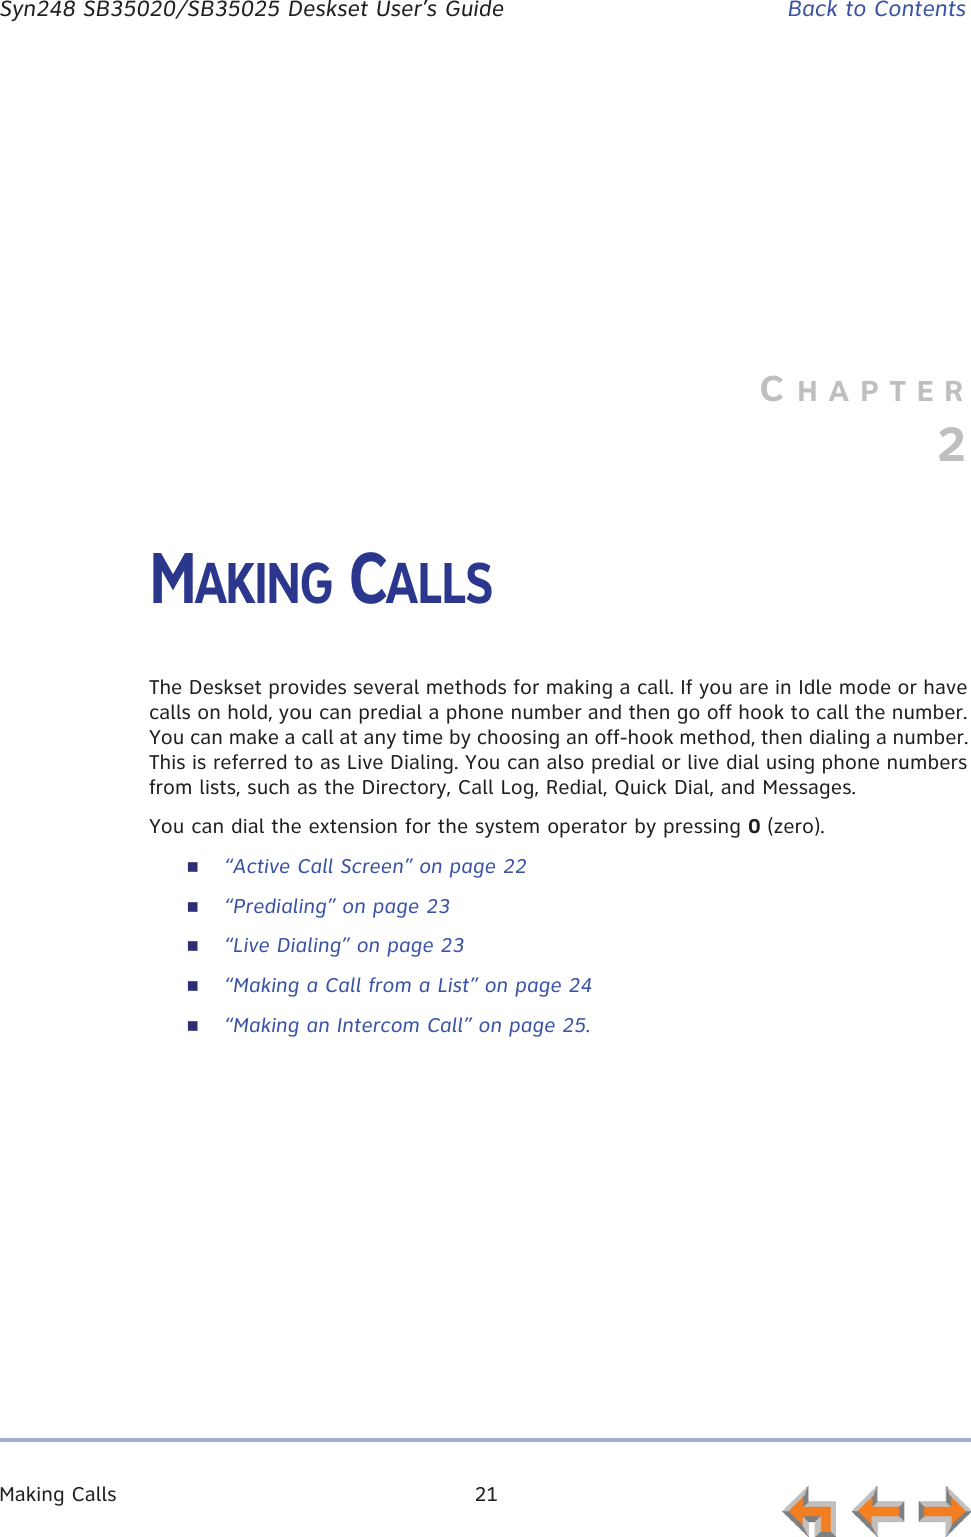 Making Calls 21      Syn248 SB35020/SB35025 Deskset User’s Guide Back to ContentsCHAPTER2MAKING CALLSThe Deskset provides several methods for making a call. If you are in Idle mode or have calls on hold, you can predial a phone number and then go off hook to call the number. You can make a call at any time by choosing an off-hook method, then dialing a number. This is referred to as Live Dialing. You can also predial or live dial using phone numbers from lists, such as the Directory, Call Log, Redial, Quick Dial, and Messages.You can dial the extension for the system operator by pressing 0 (zero).“Active Call Screen” on page 22“Predialing” on page 23“Live Dialing” on page 23“Making a Call from a List” on page 24“Making an Intercom Call” on page 25.